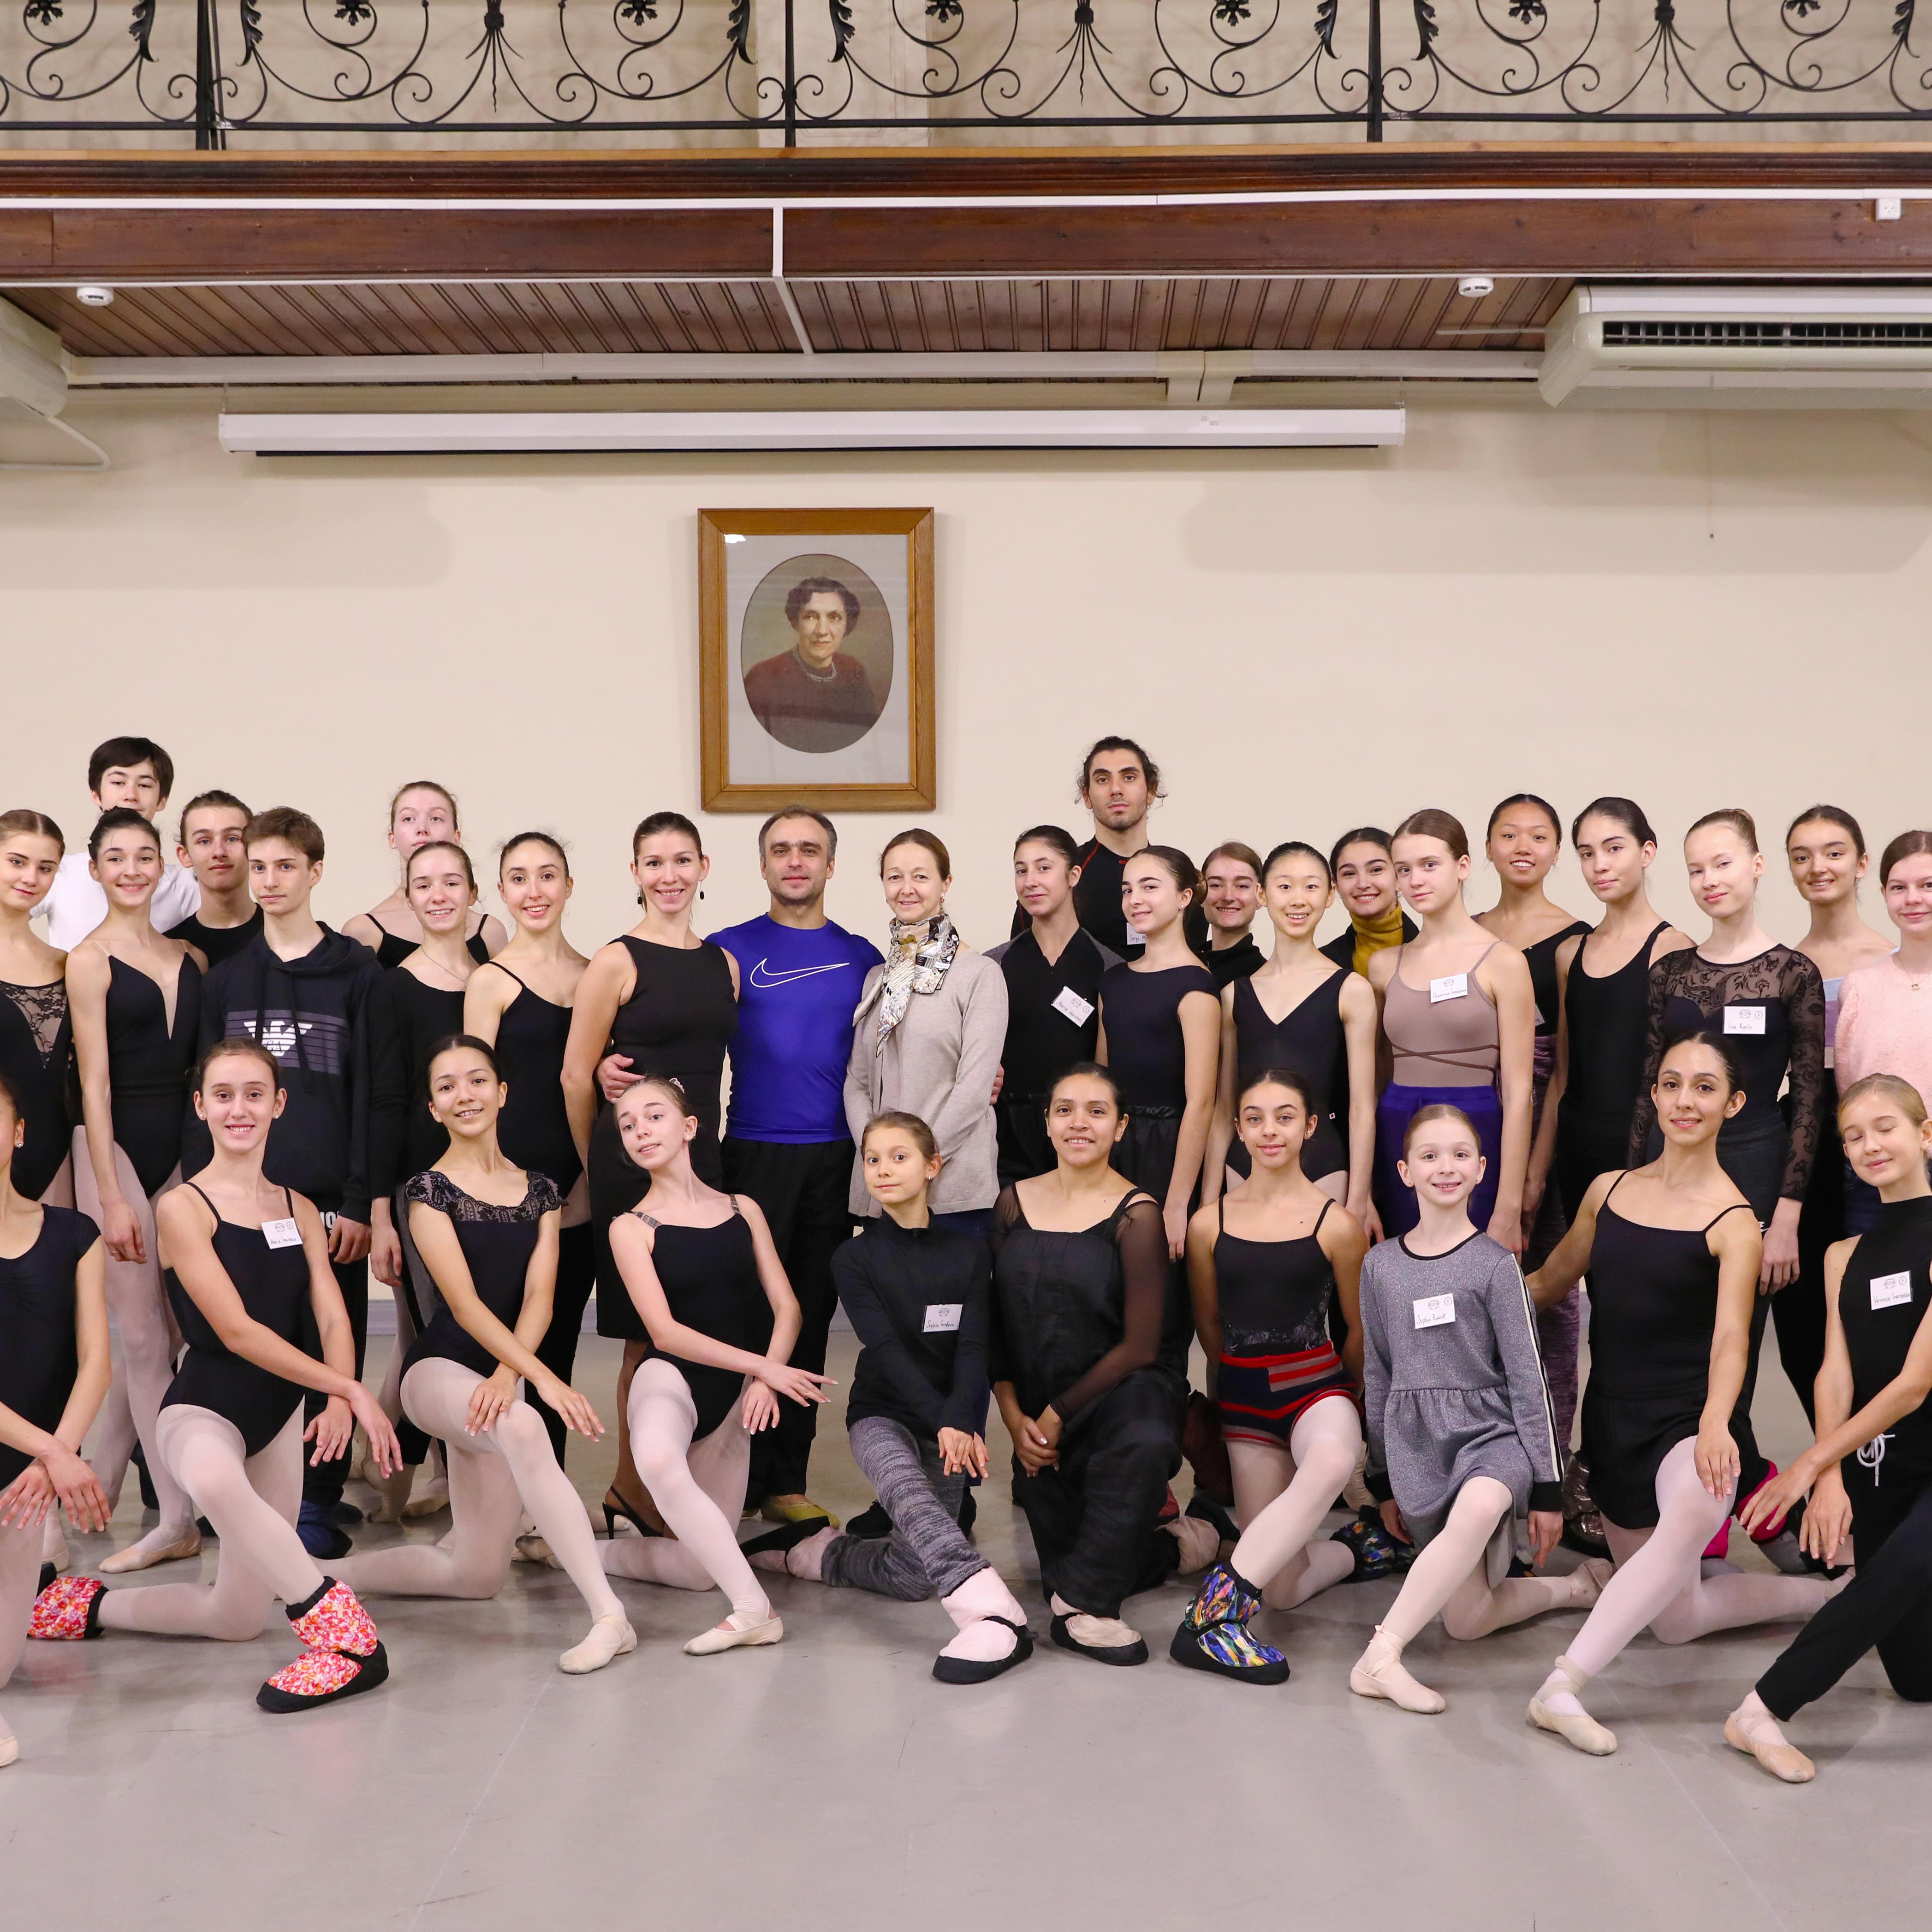 Meeting with ballet stars